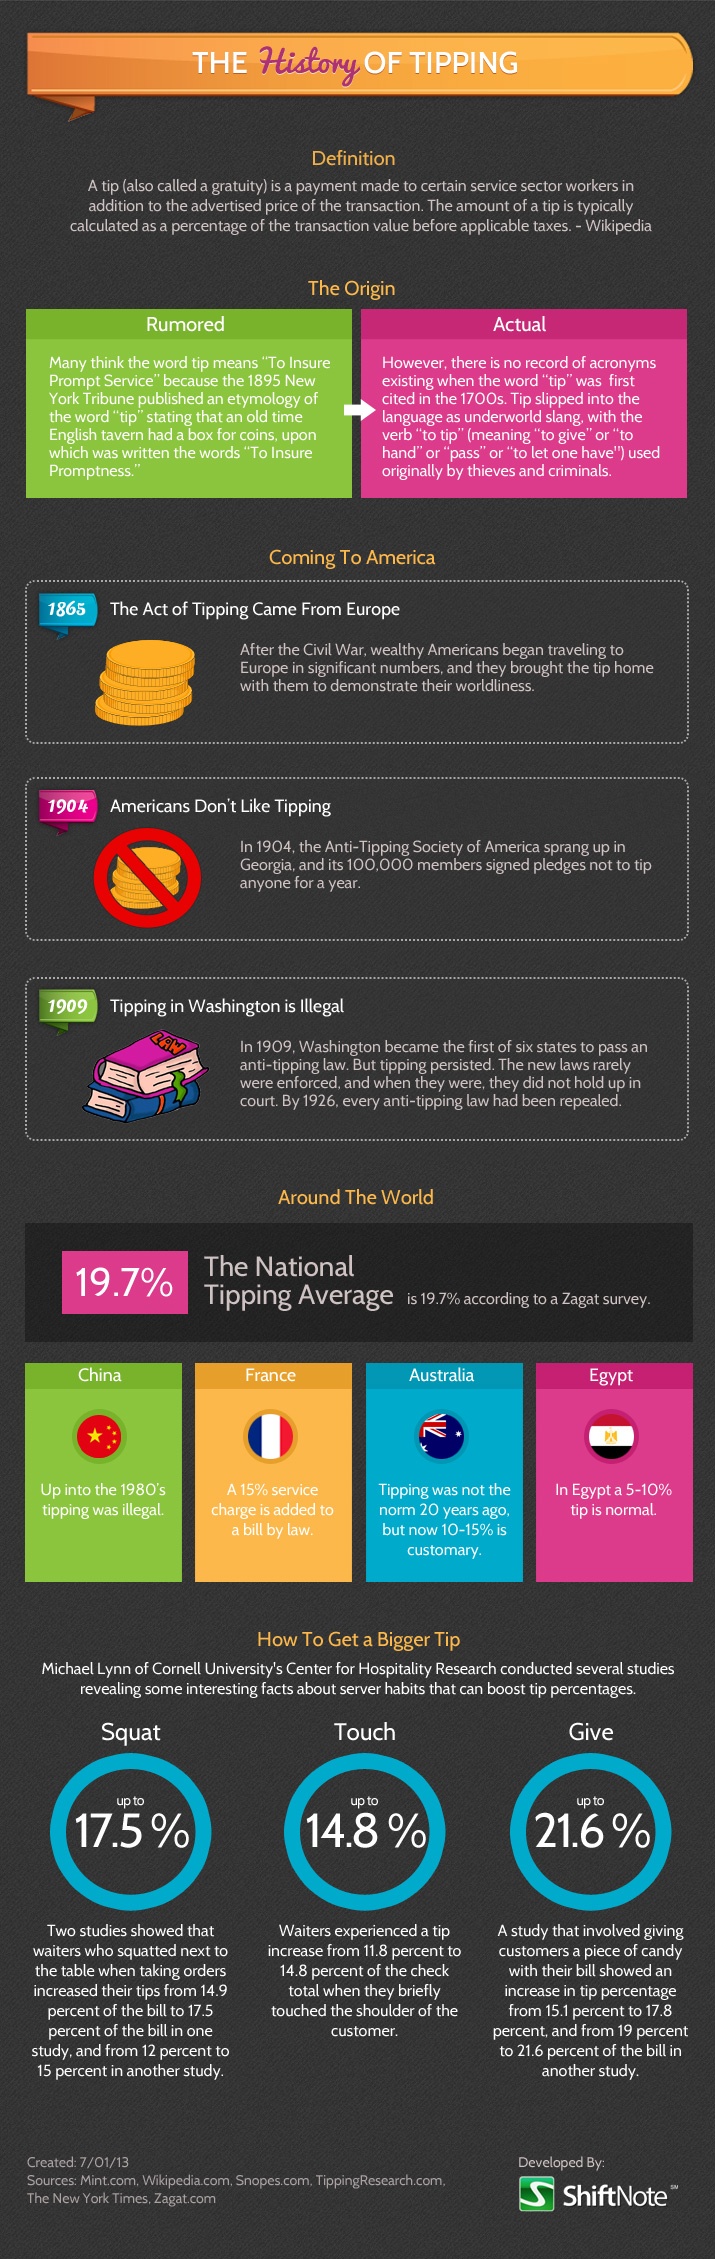 history of tipping infographic